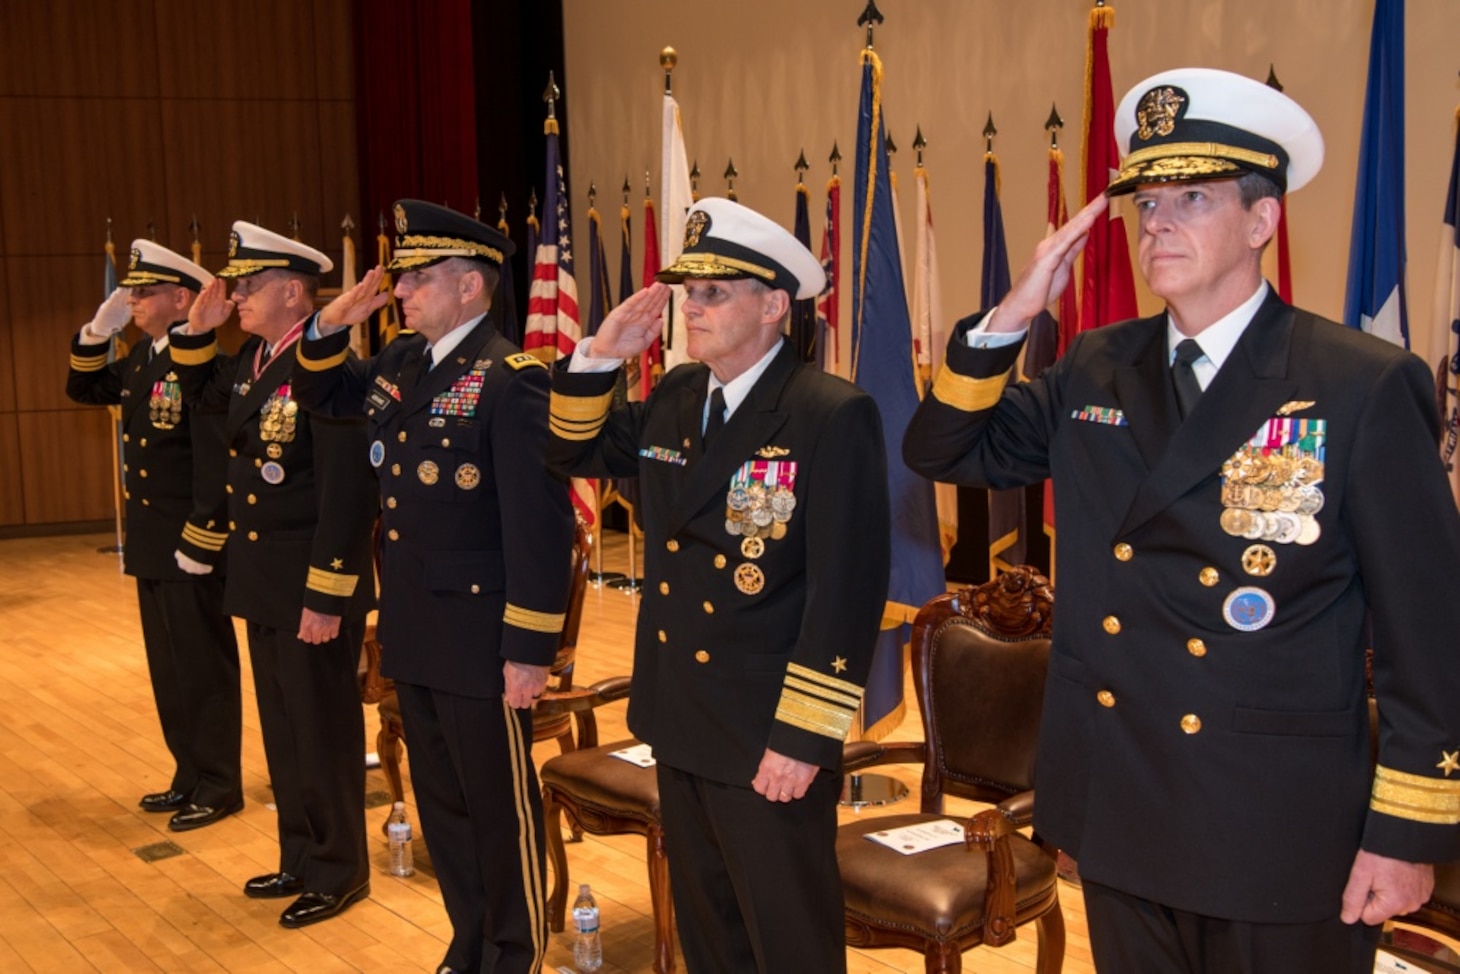 190425-N-TB148-0052 BUSAN, Republic of Korea (April 25, 2019) The official party (from left): Cmdr. Santiago Rodriguez, command chaplain assigned to Commander, U.S. Naval Forces Korea (CNFK); Rear Adm. Michael E. Boyle, commander, CNFK; U.S. Army Gen. Robert B. Abrams, commander, U.S. Forces Korea; Vice Adm. Phillip Sawyer, commander, U.S. 7th Fleet; and Rear Adm. Michael P. Donnelly render a salute during a change of command ceremony at (CNFK) headquarters. During the ceremony, Donnelly relieved Boyle to become CNFK's 37th commander.